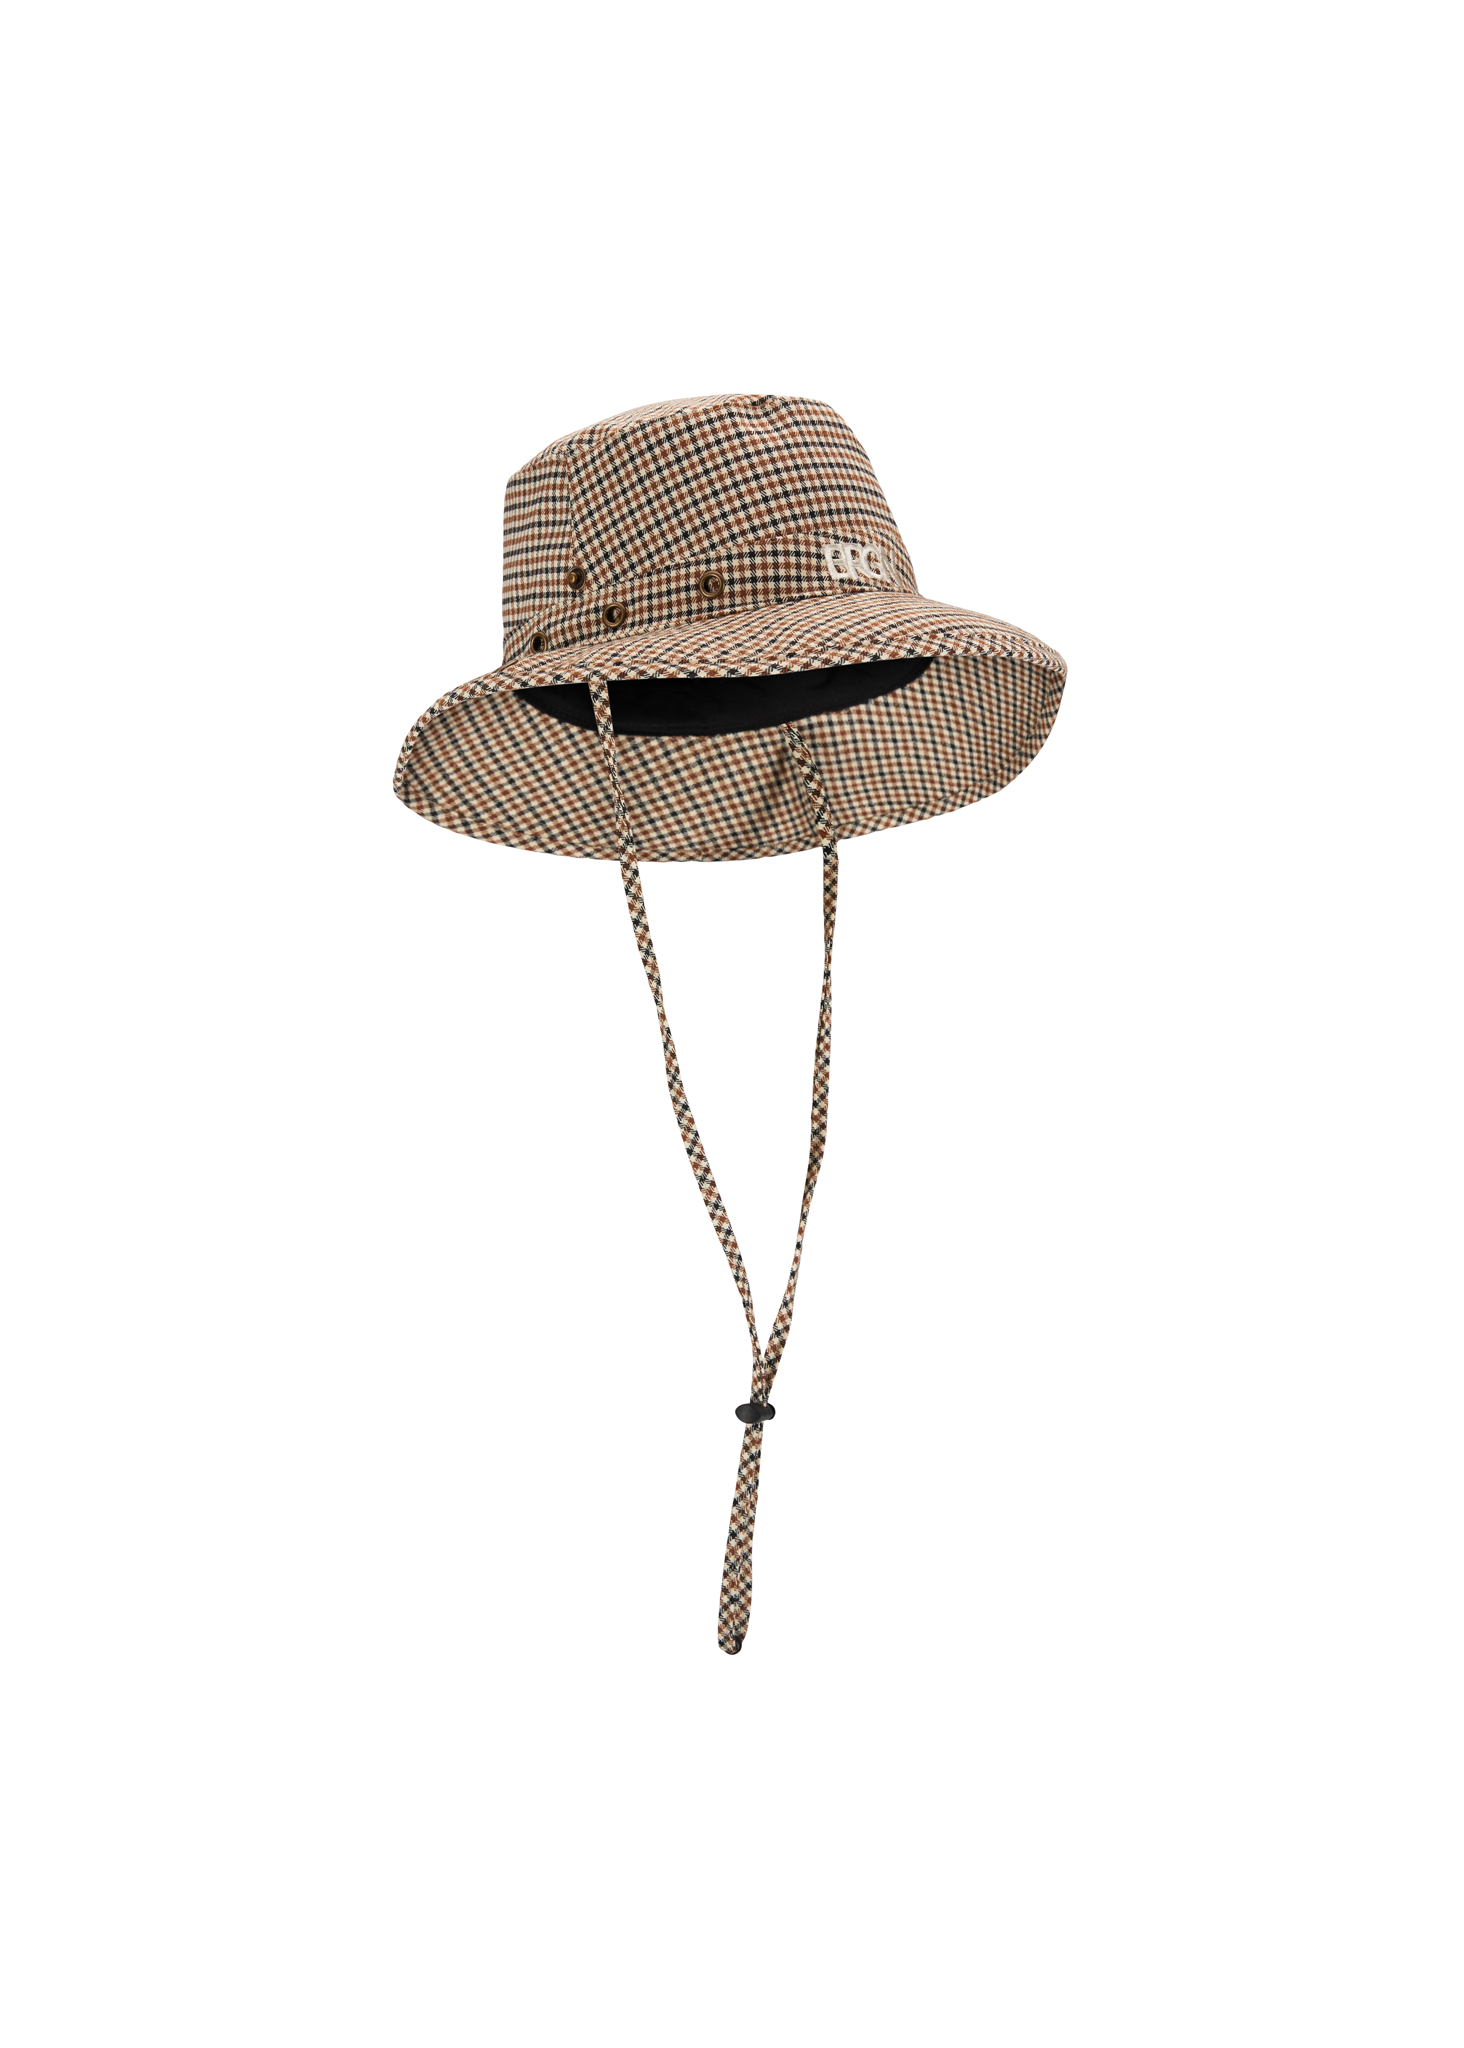 BRGN Wild West Hat Accessories 143 Check